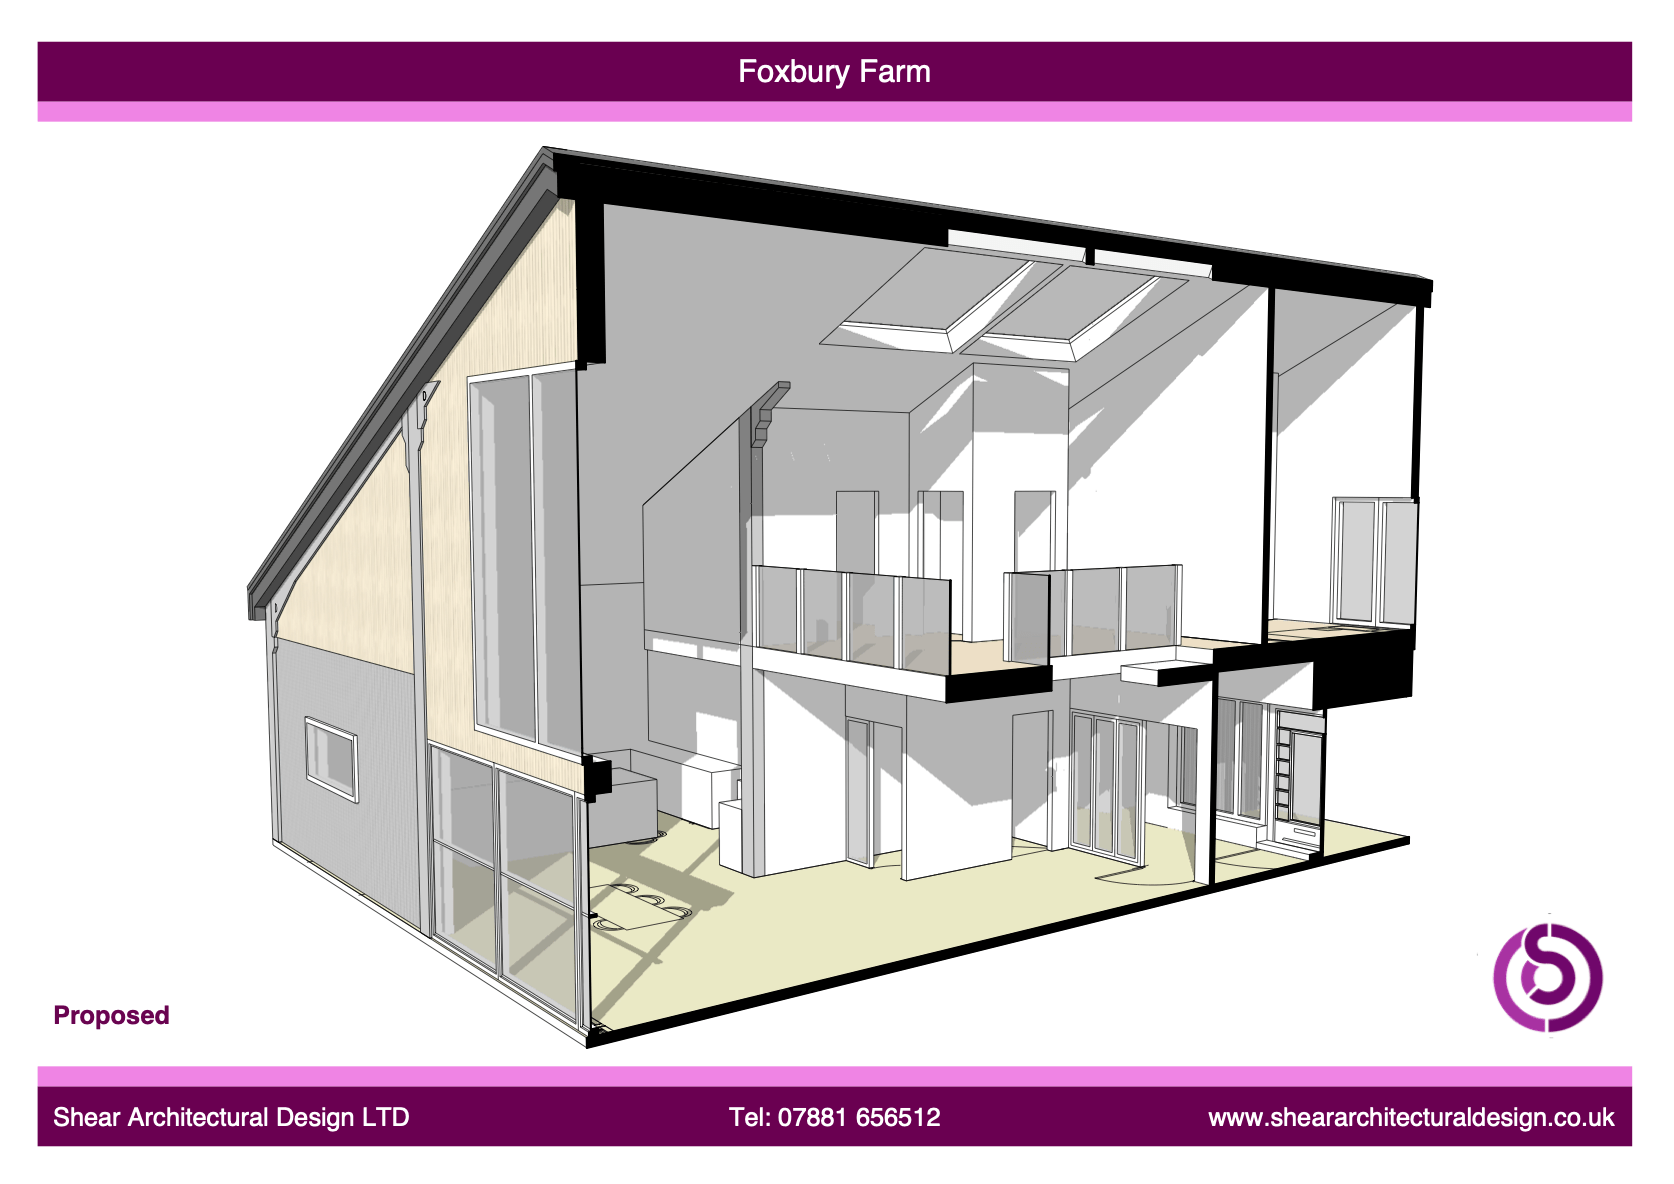 Drawing of a sleek Sussex new build home, featuring large windows, open-plan layout, and minimalist exterior, embodying modern architectural design